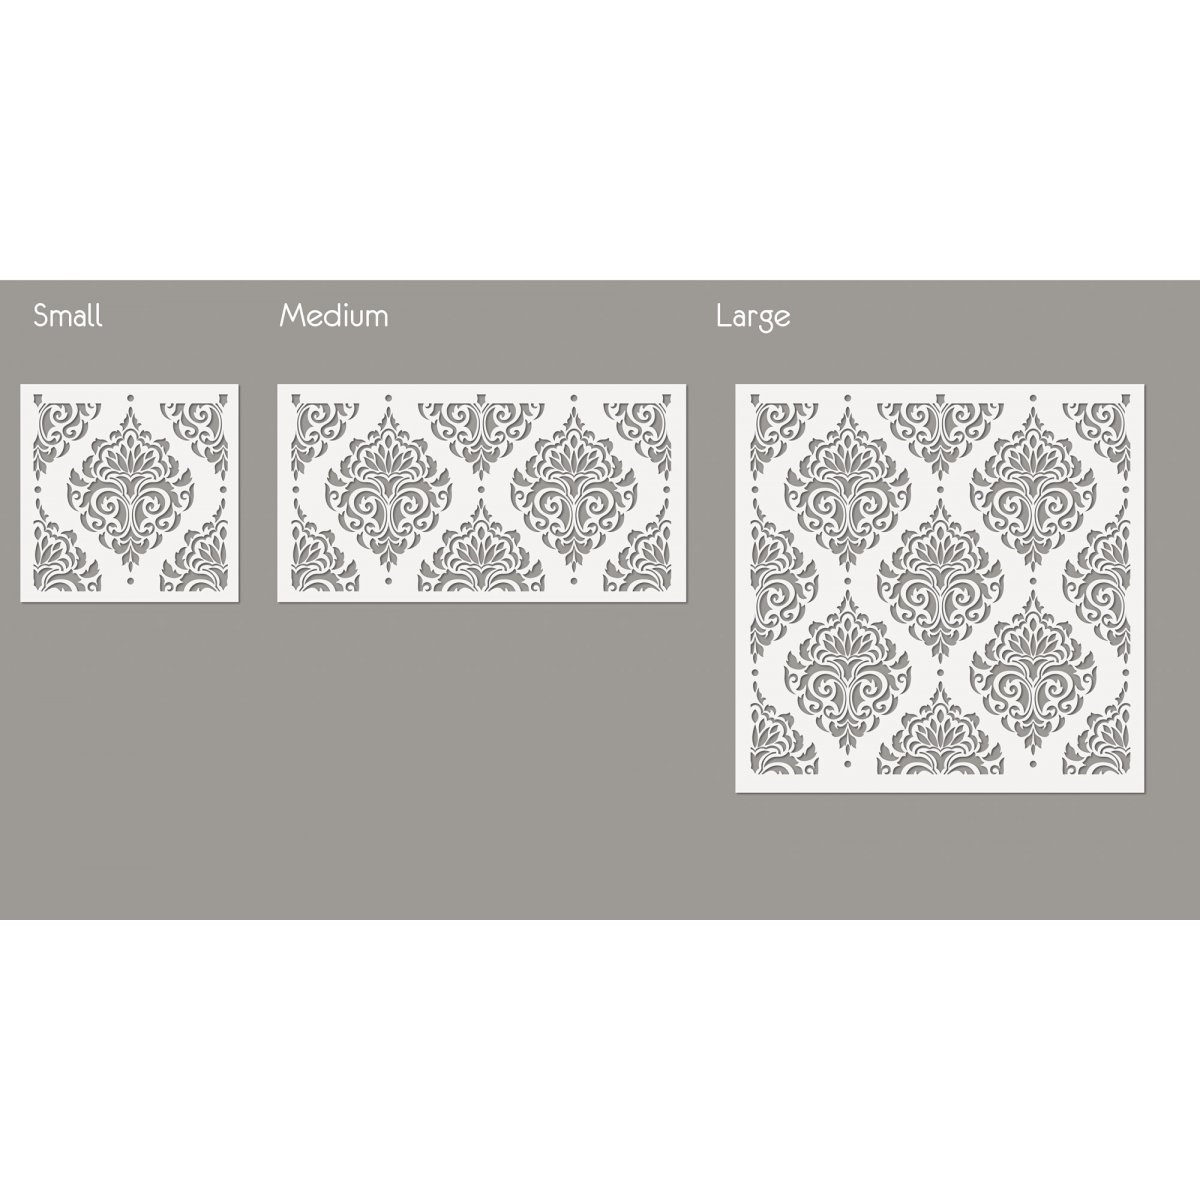 FLOWER DAMASK / Reusable Allover Large Wall Stencils for Painting